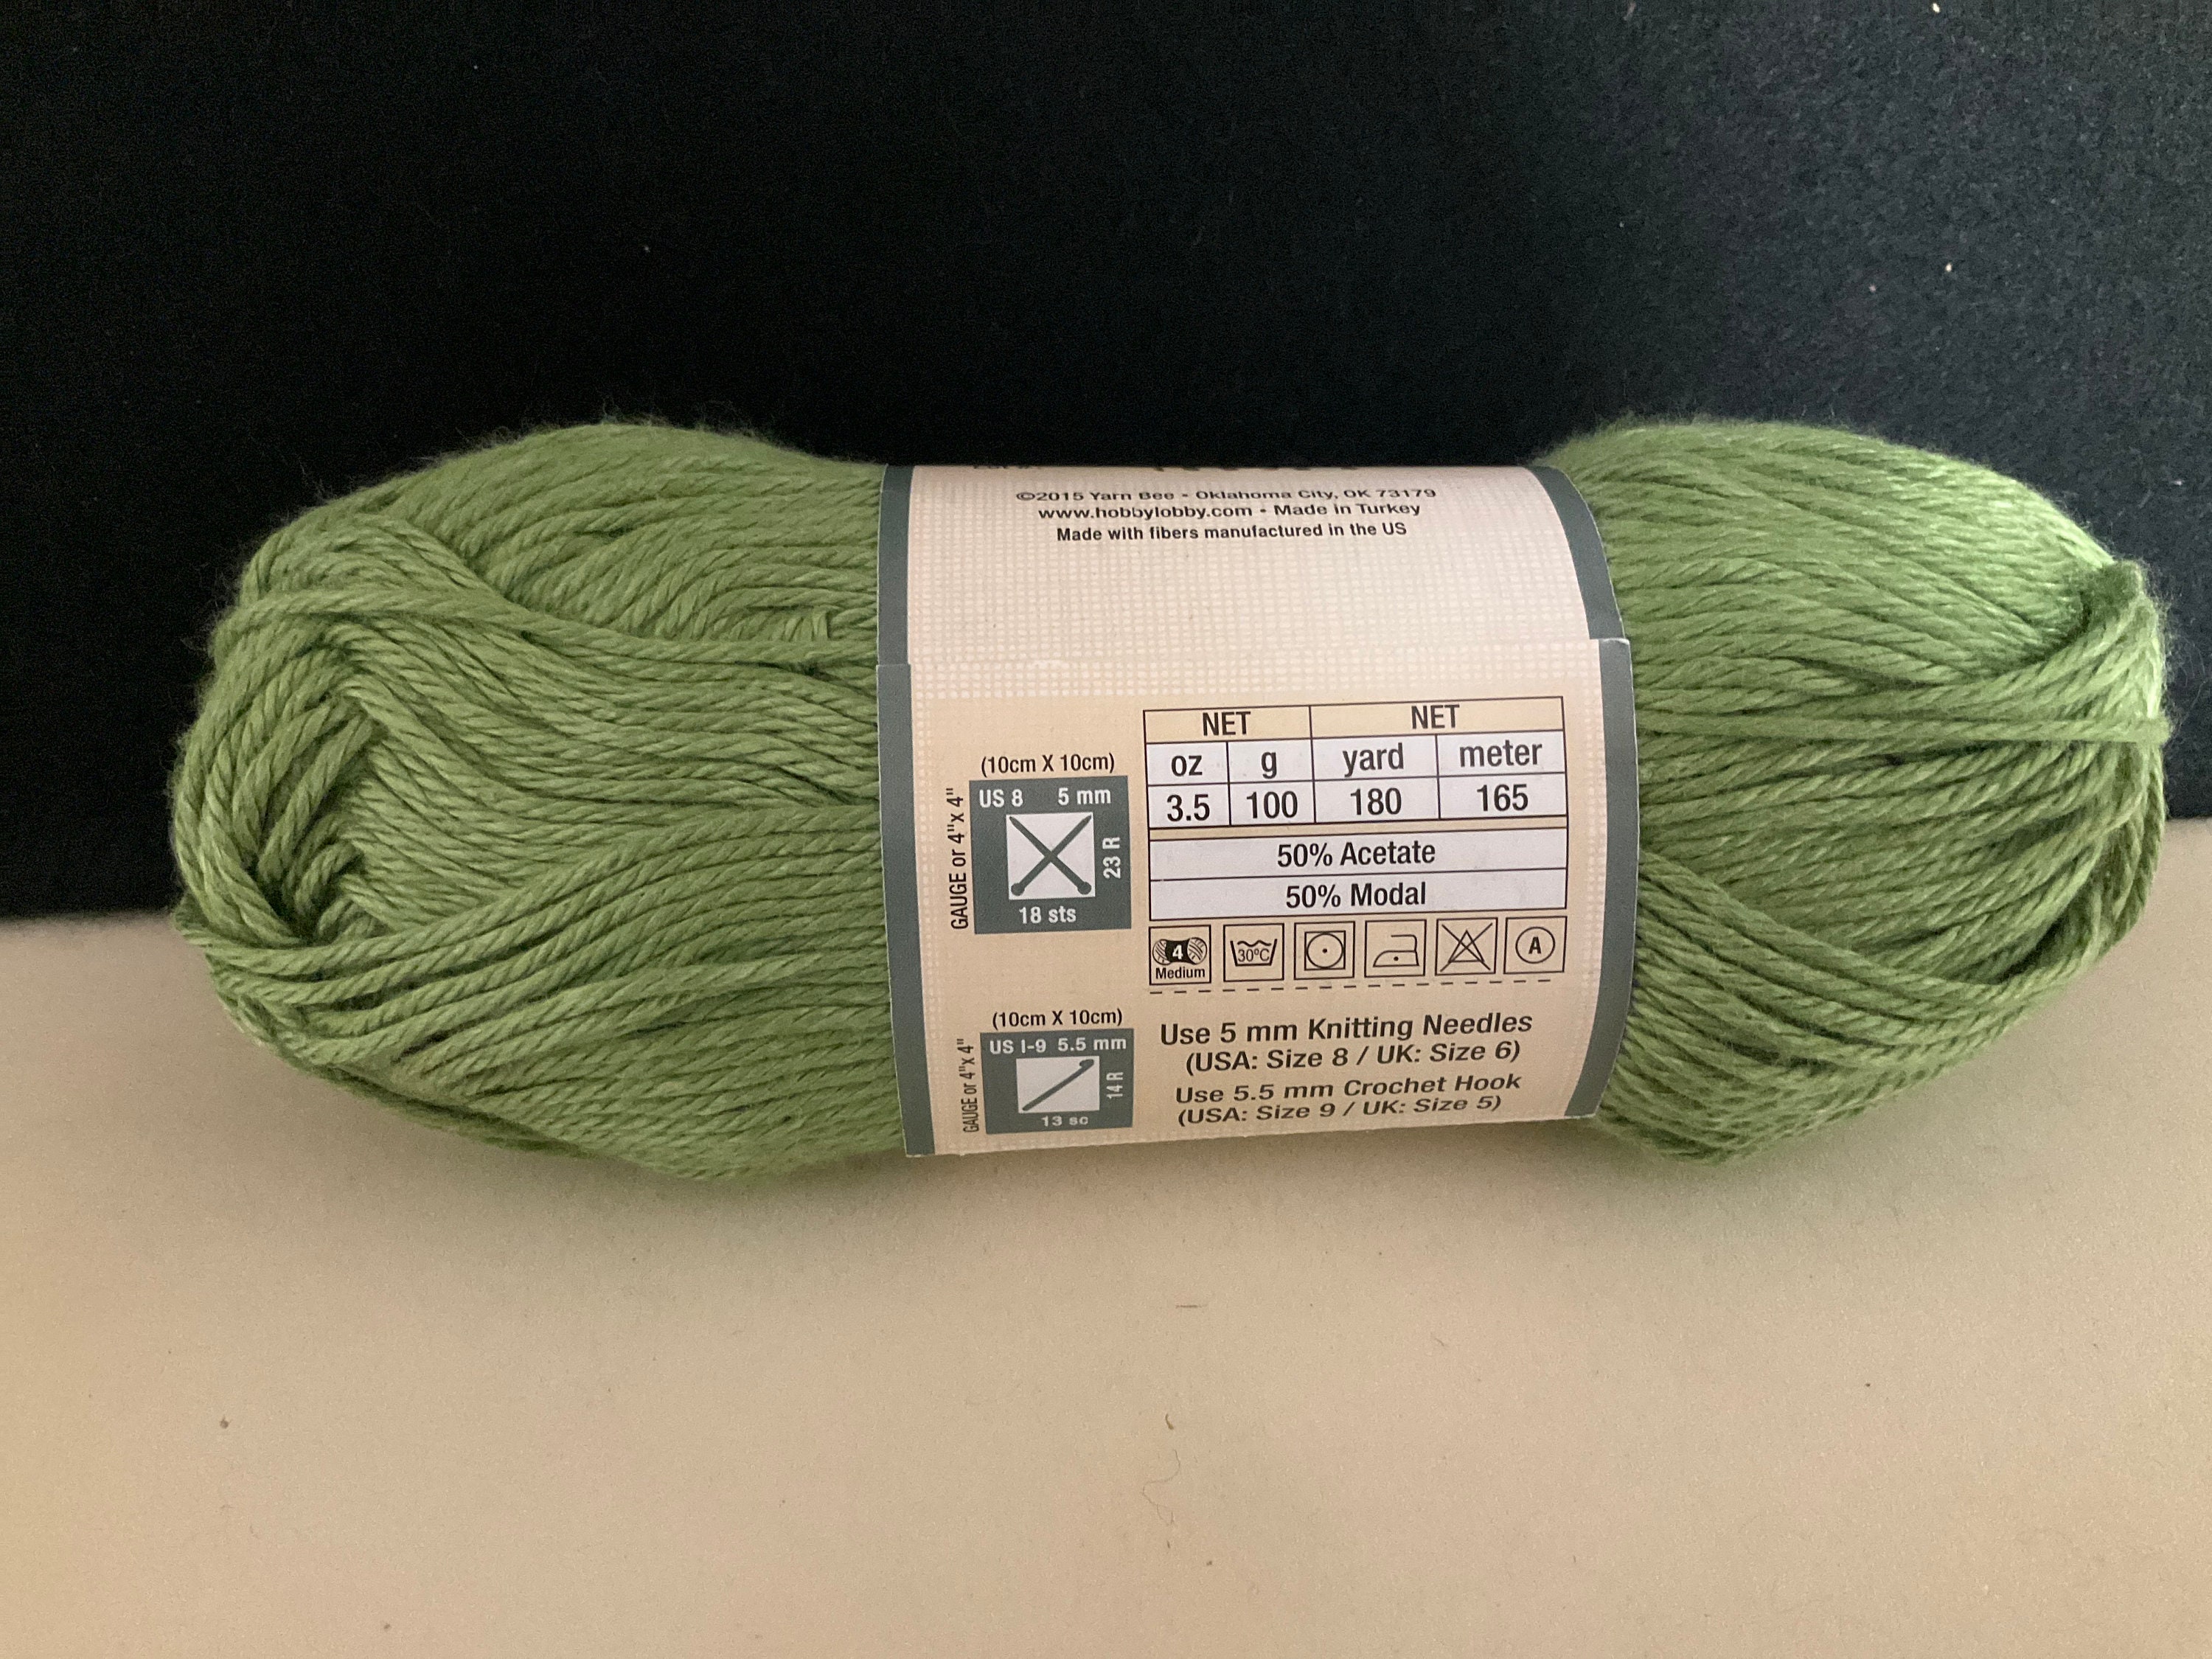 Yarn Bee Stitch 101 50/50 Color Sage Green Lot of 2 Skeins 3.5oz 180yards